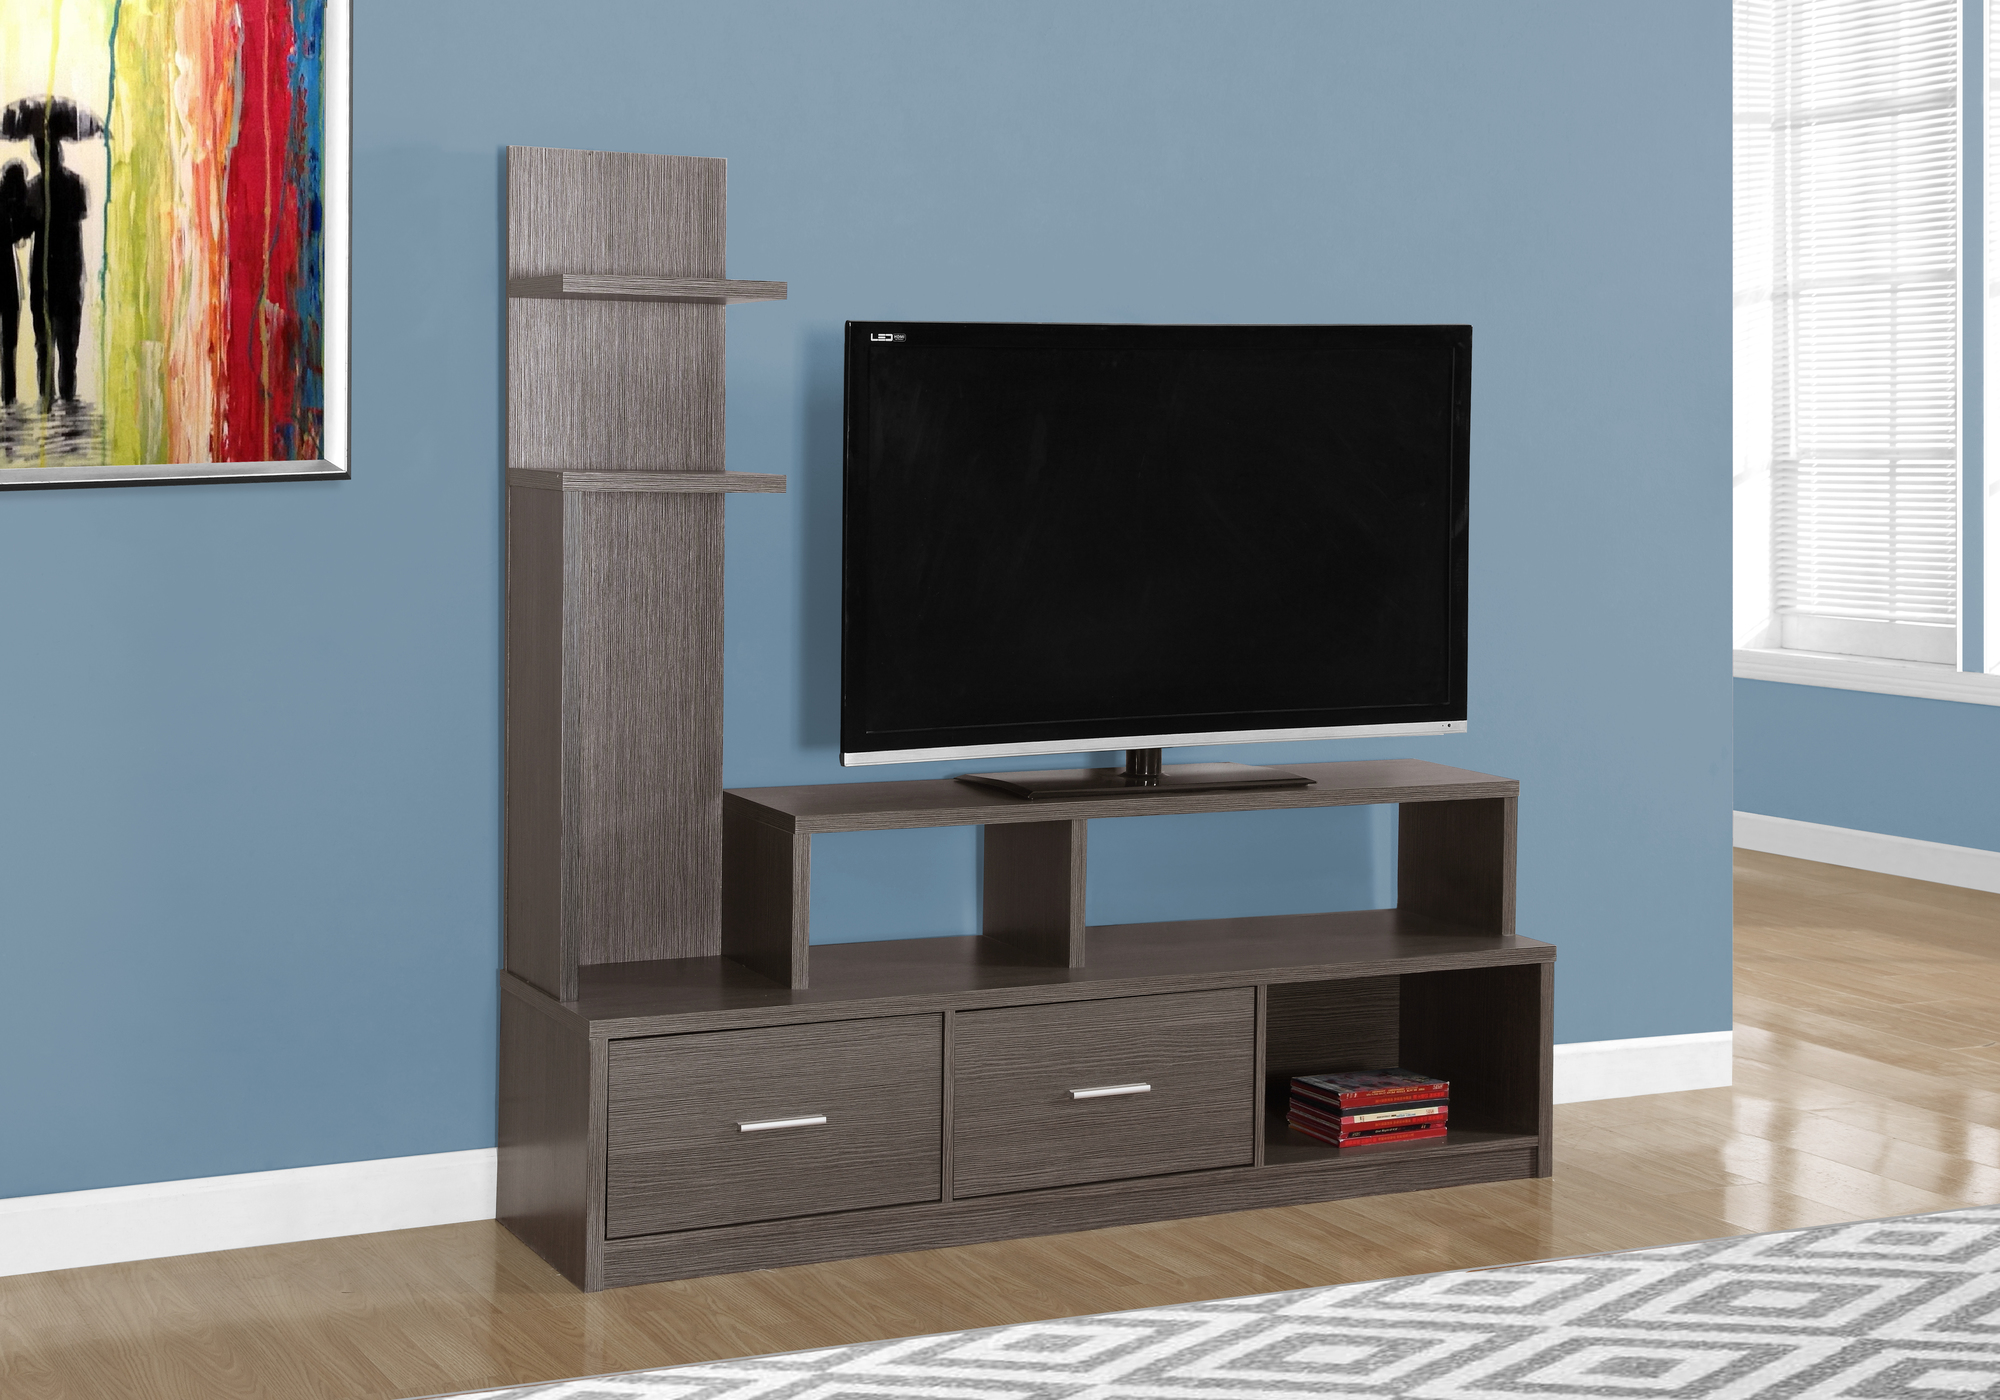 Monarch Specialties Tv Stand 60 Inch, Console, Media Entertainment Center, Storage Cabinet, Laminate - image 1 of 4